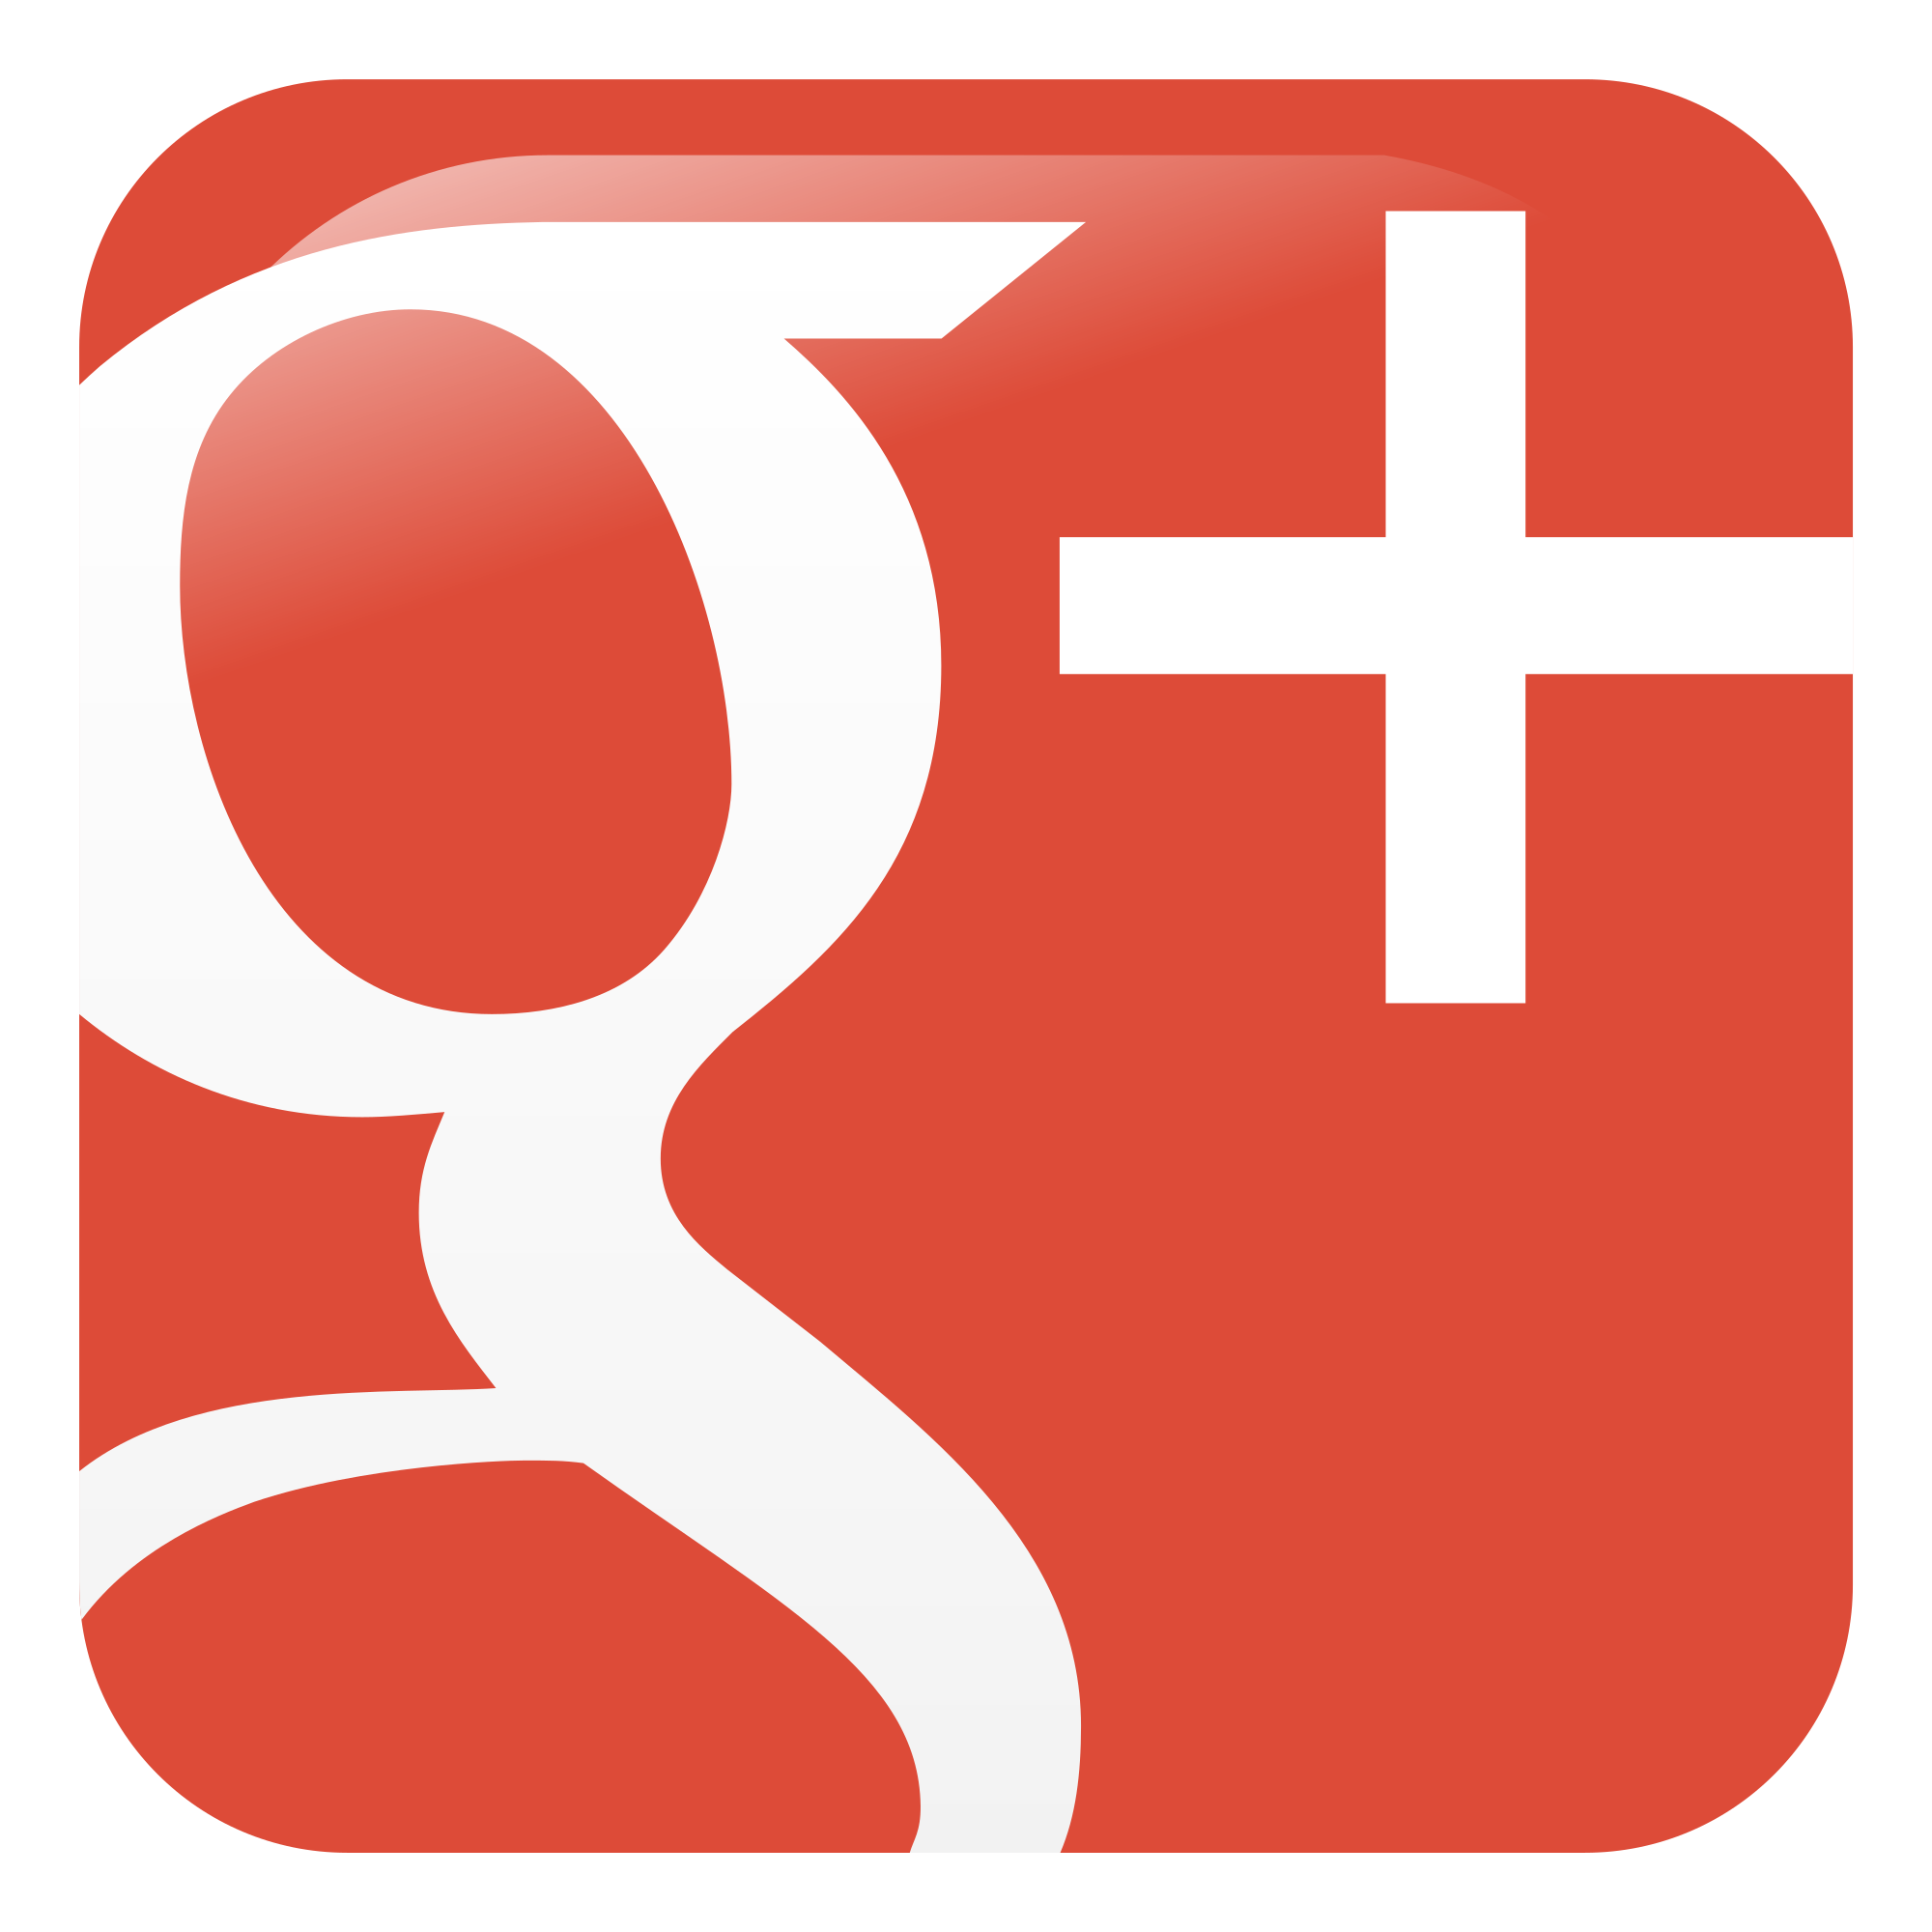 Google Plus Icon Clip Art .png and .svg Pictures downloads 